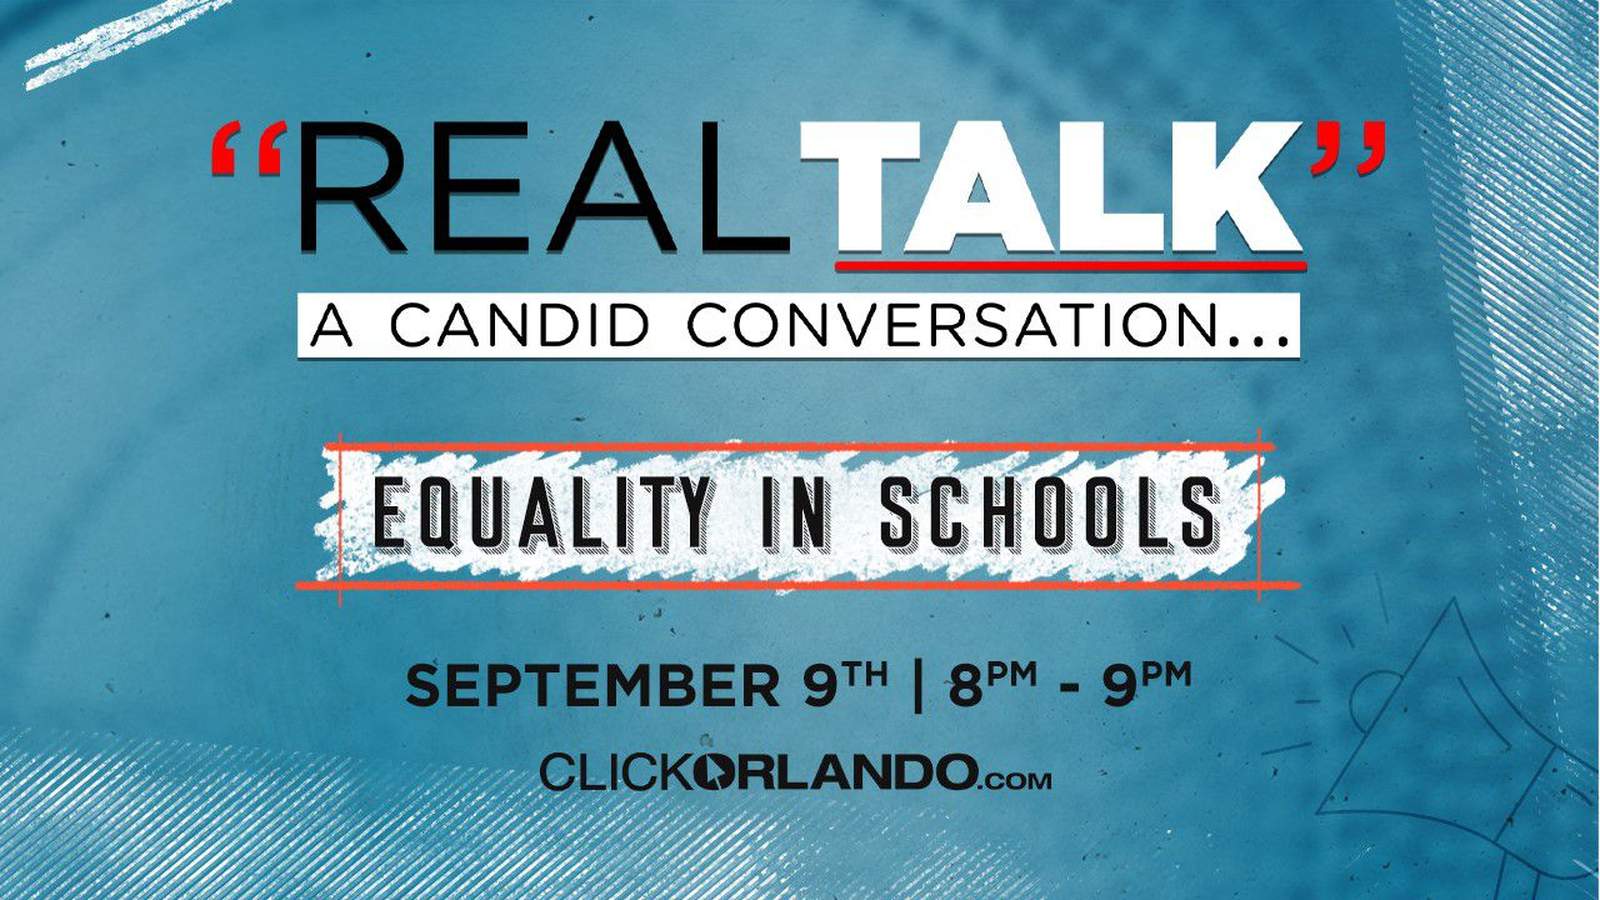 News 6 hosts Real Talk town hall on equality in schools